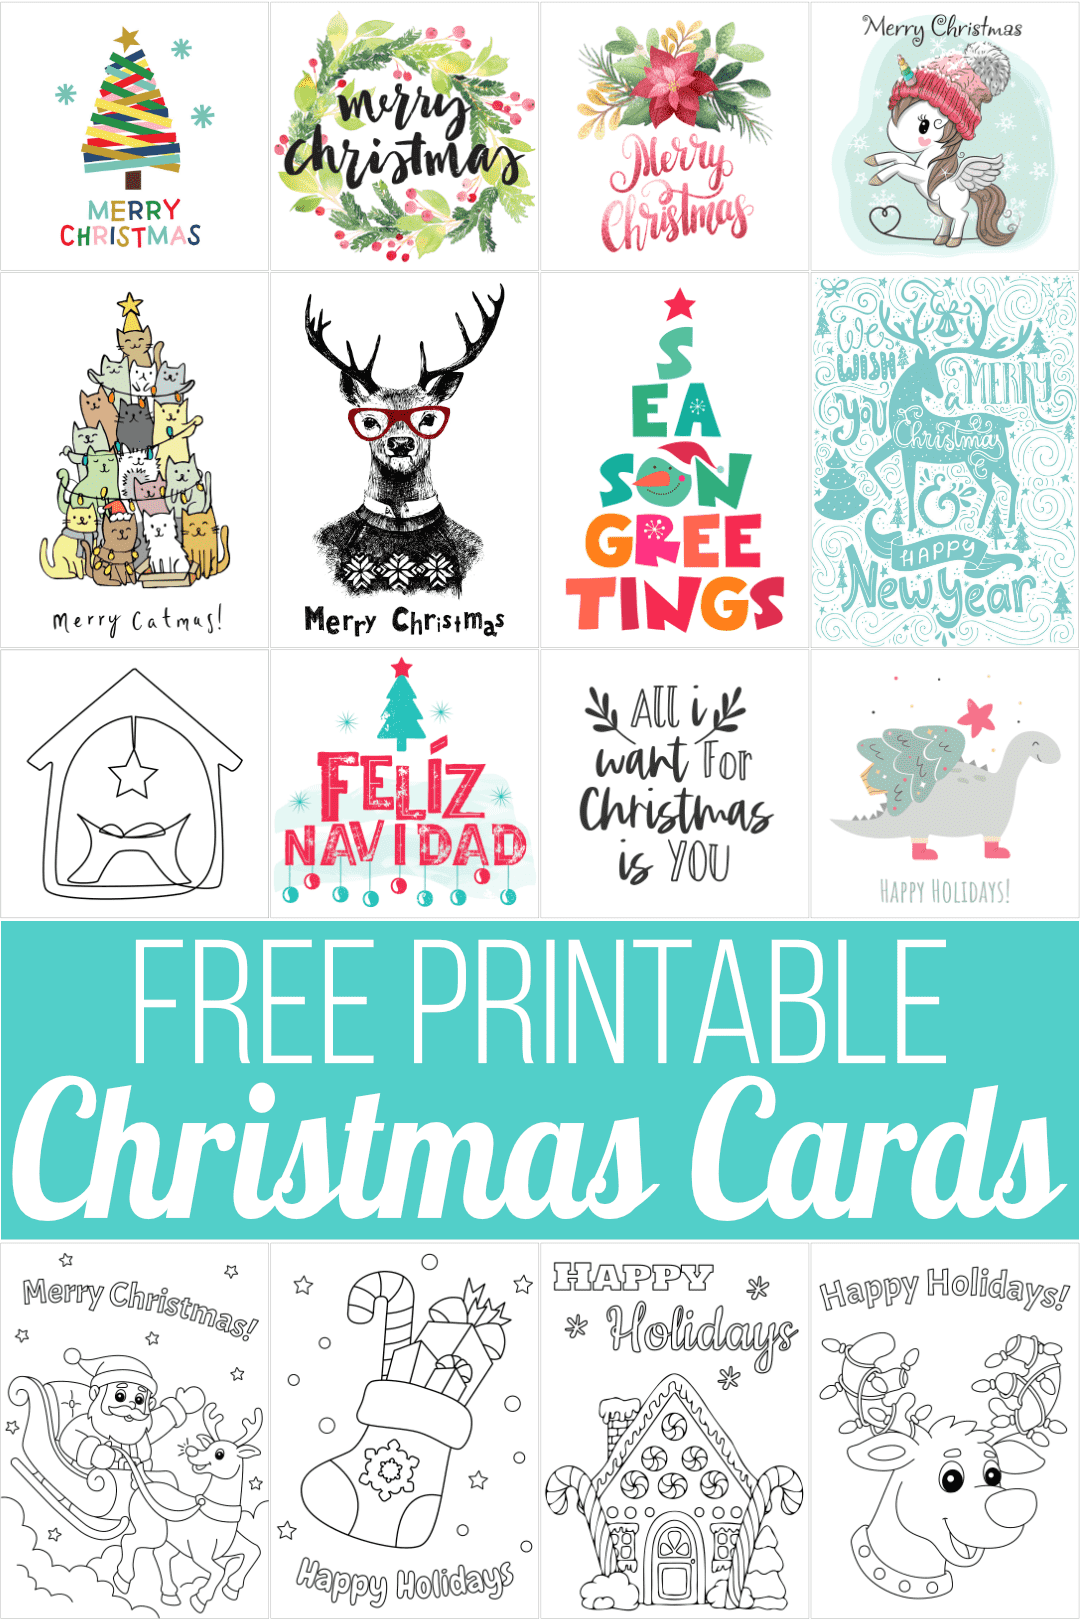 20 Free Printable Christmas Cards for 20 With Christmas Note Card Templates